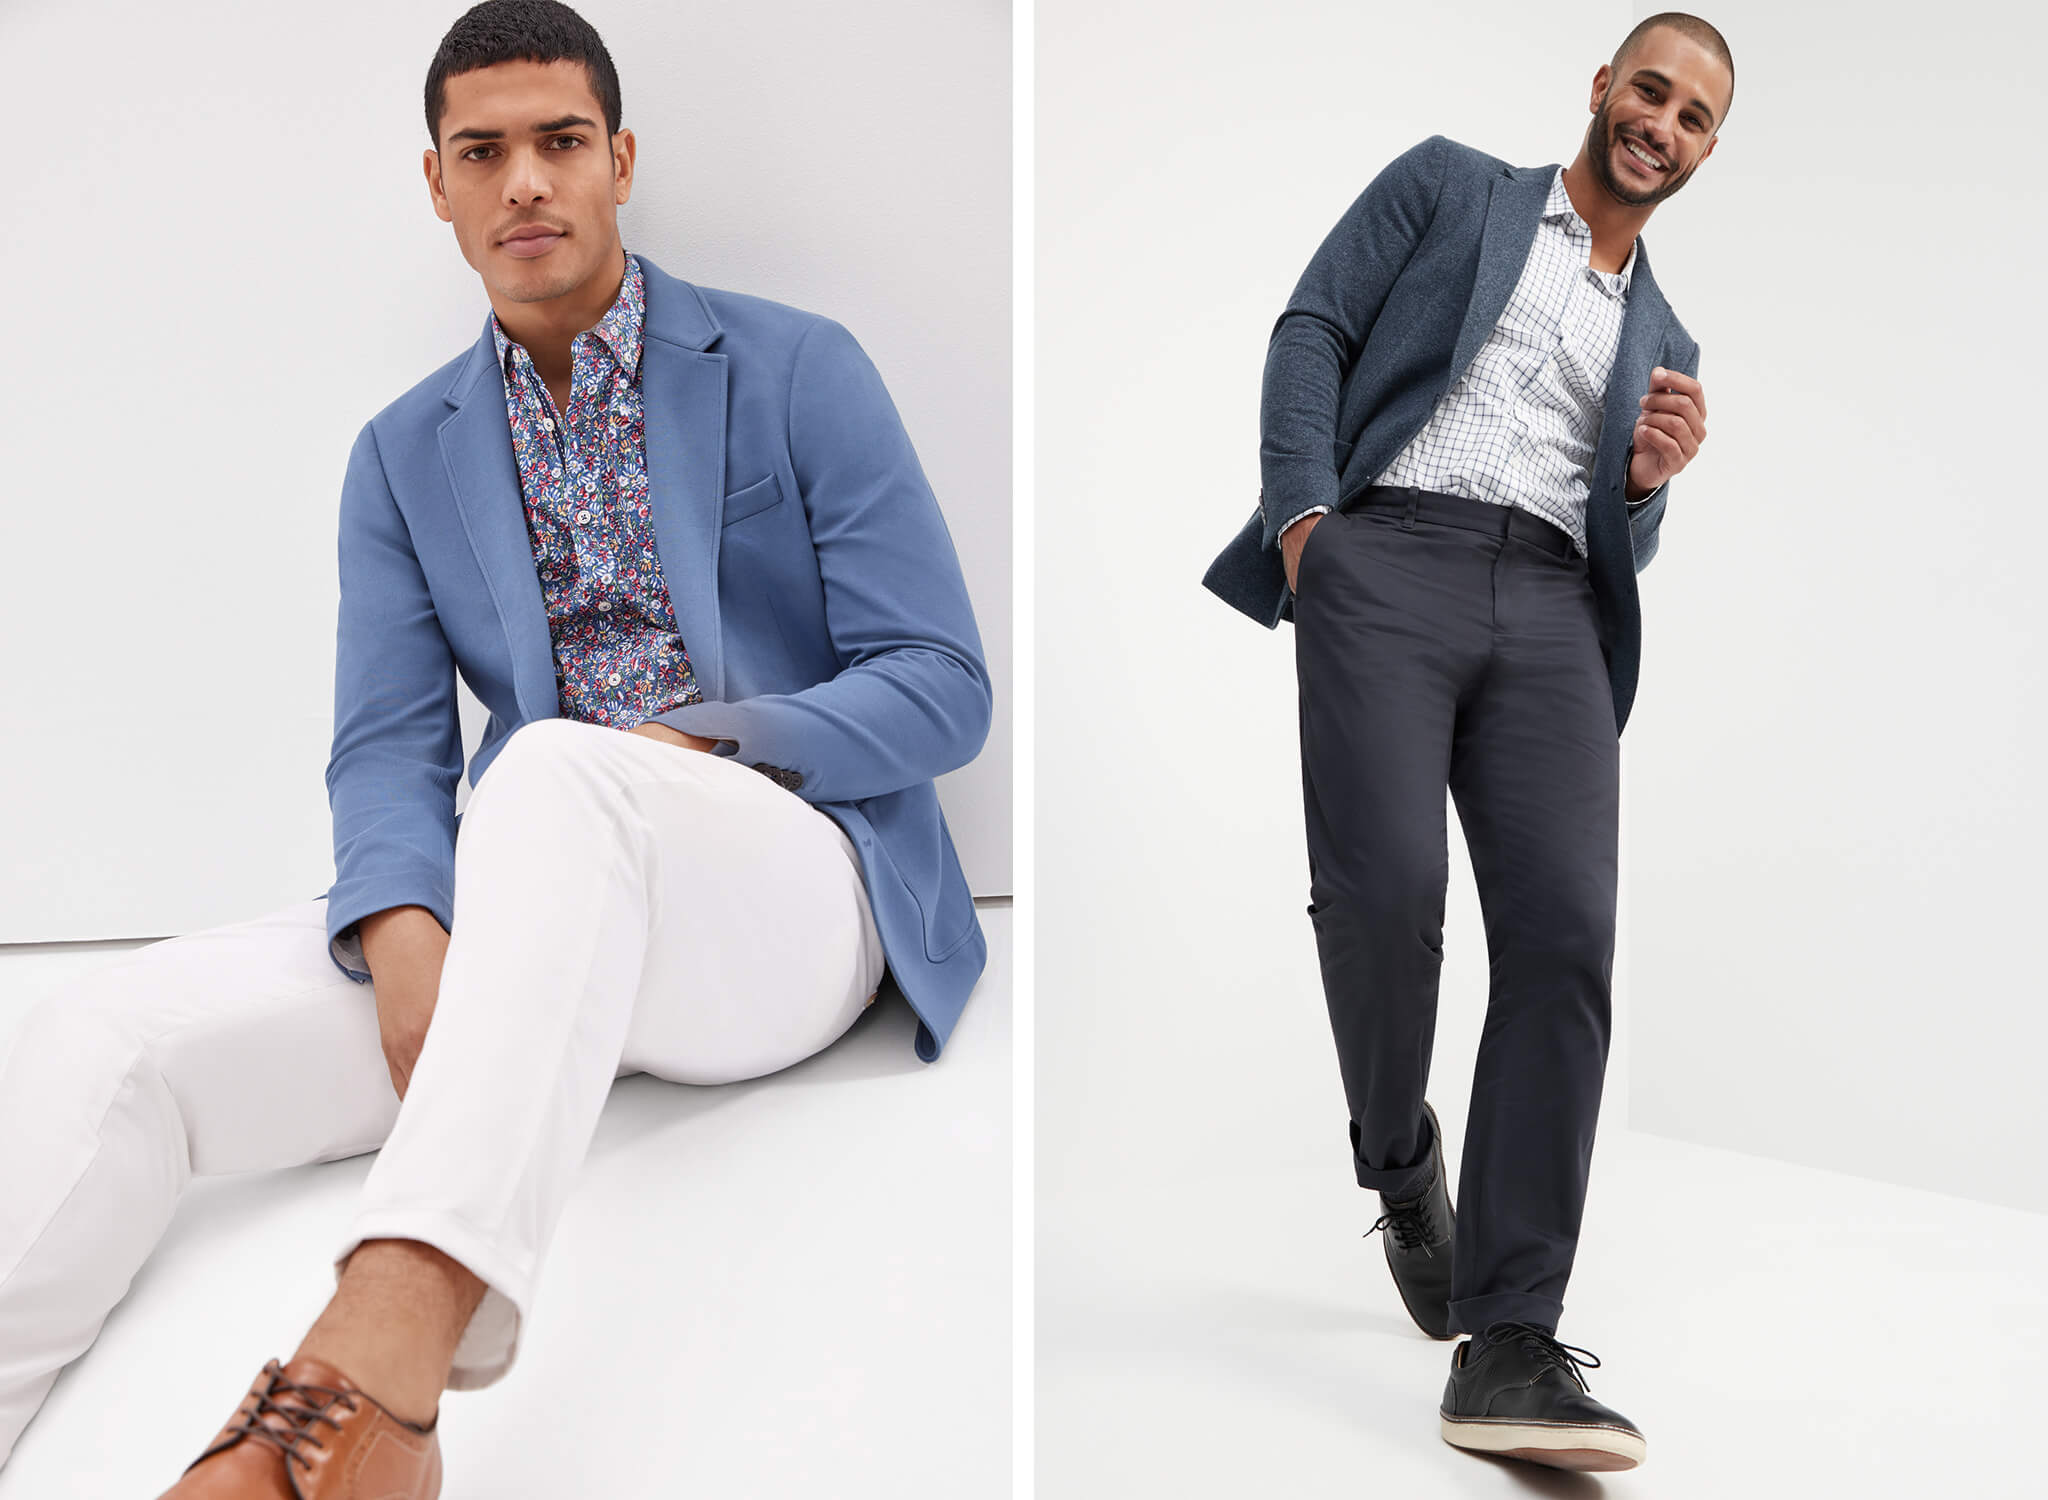 men's fall outfit featuring blue blazer and white denim, men's outfit featuring slim-cut blue blazer and shirt